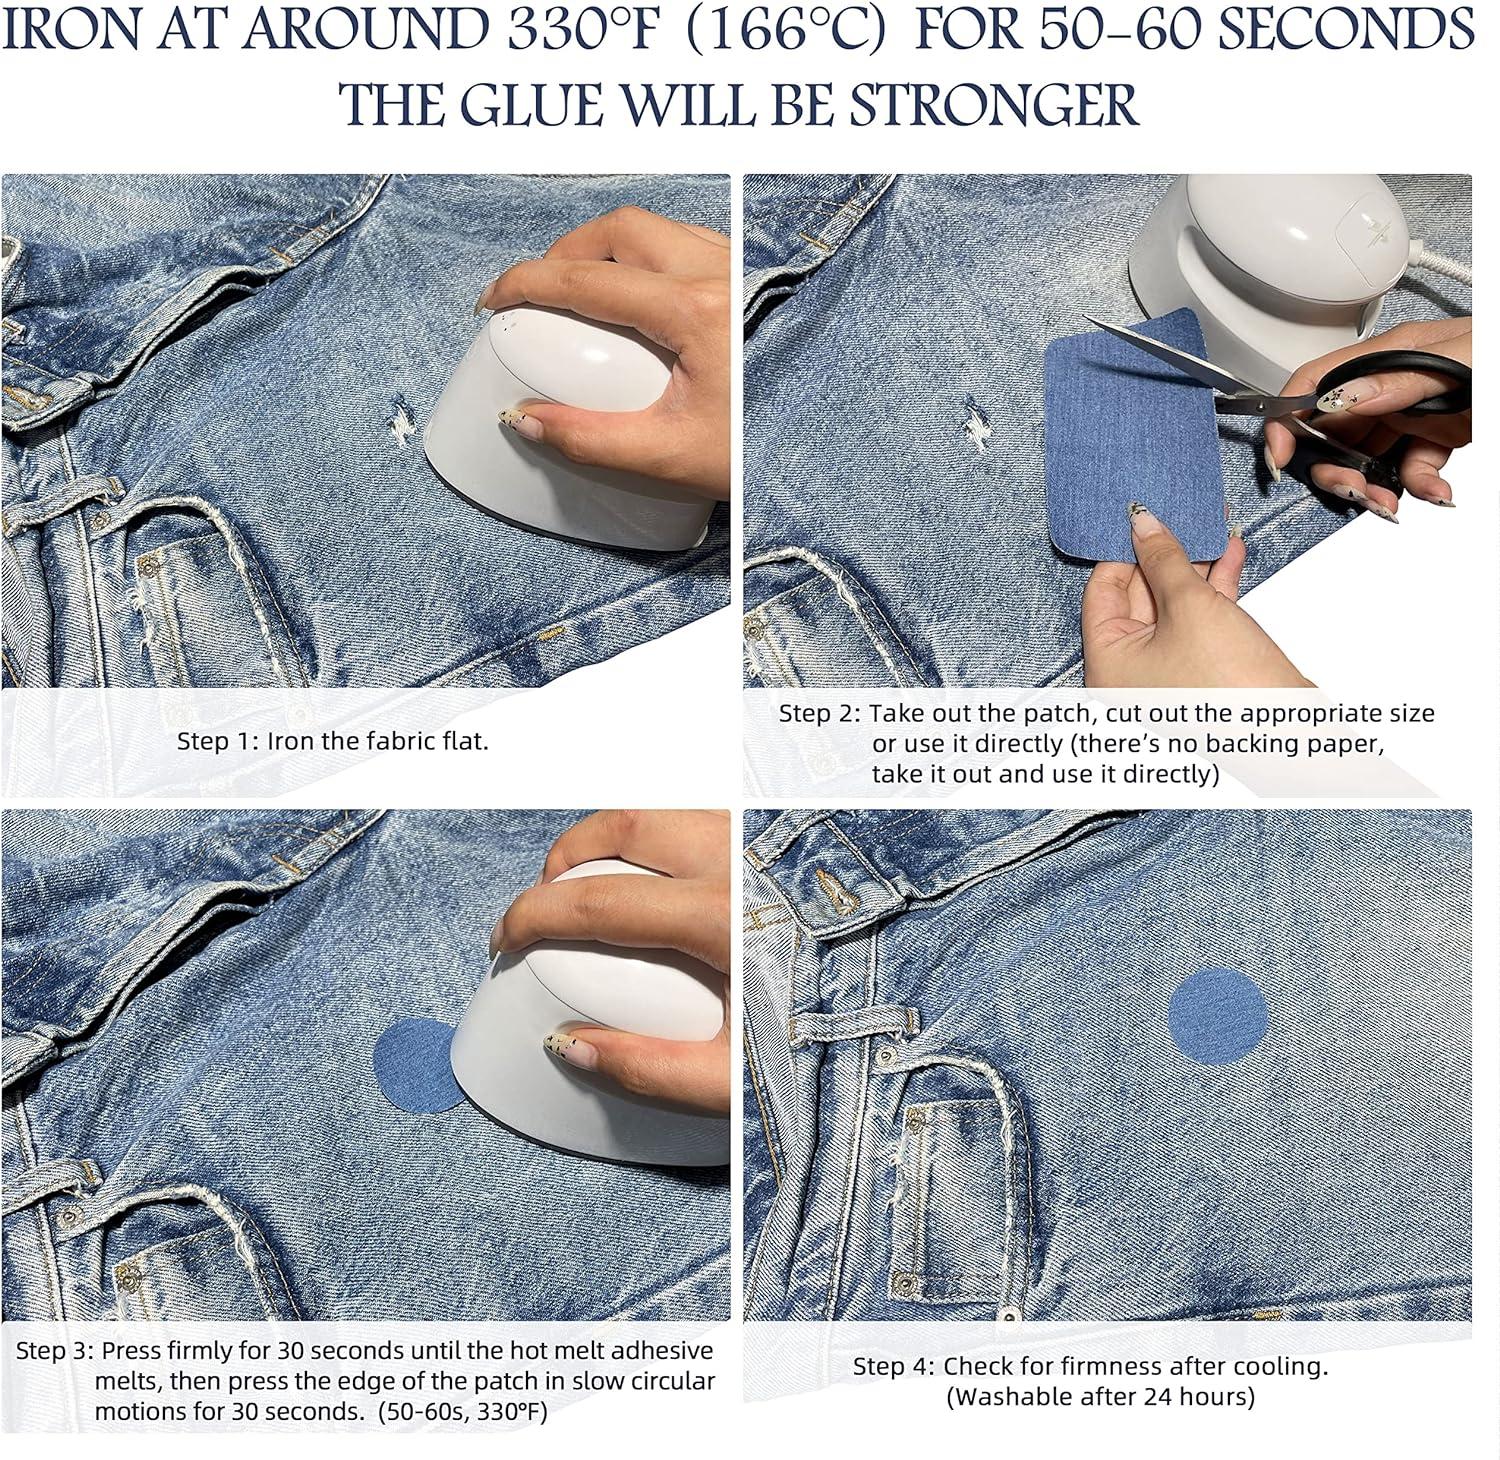 10 Pcs Denim Patches for Jeans Repair,Iron-on Jean Patches Inside & Outside  Strongest Glue 100% Cotton Assorted Shades of Blue Repair Decorating Kit on  OnBuy